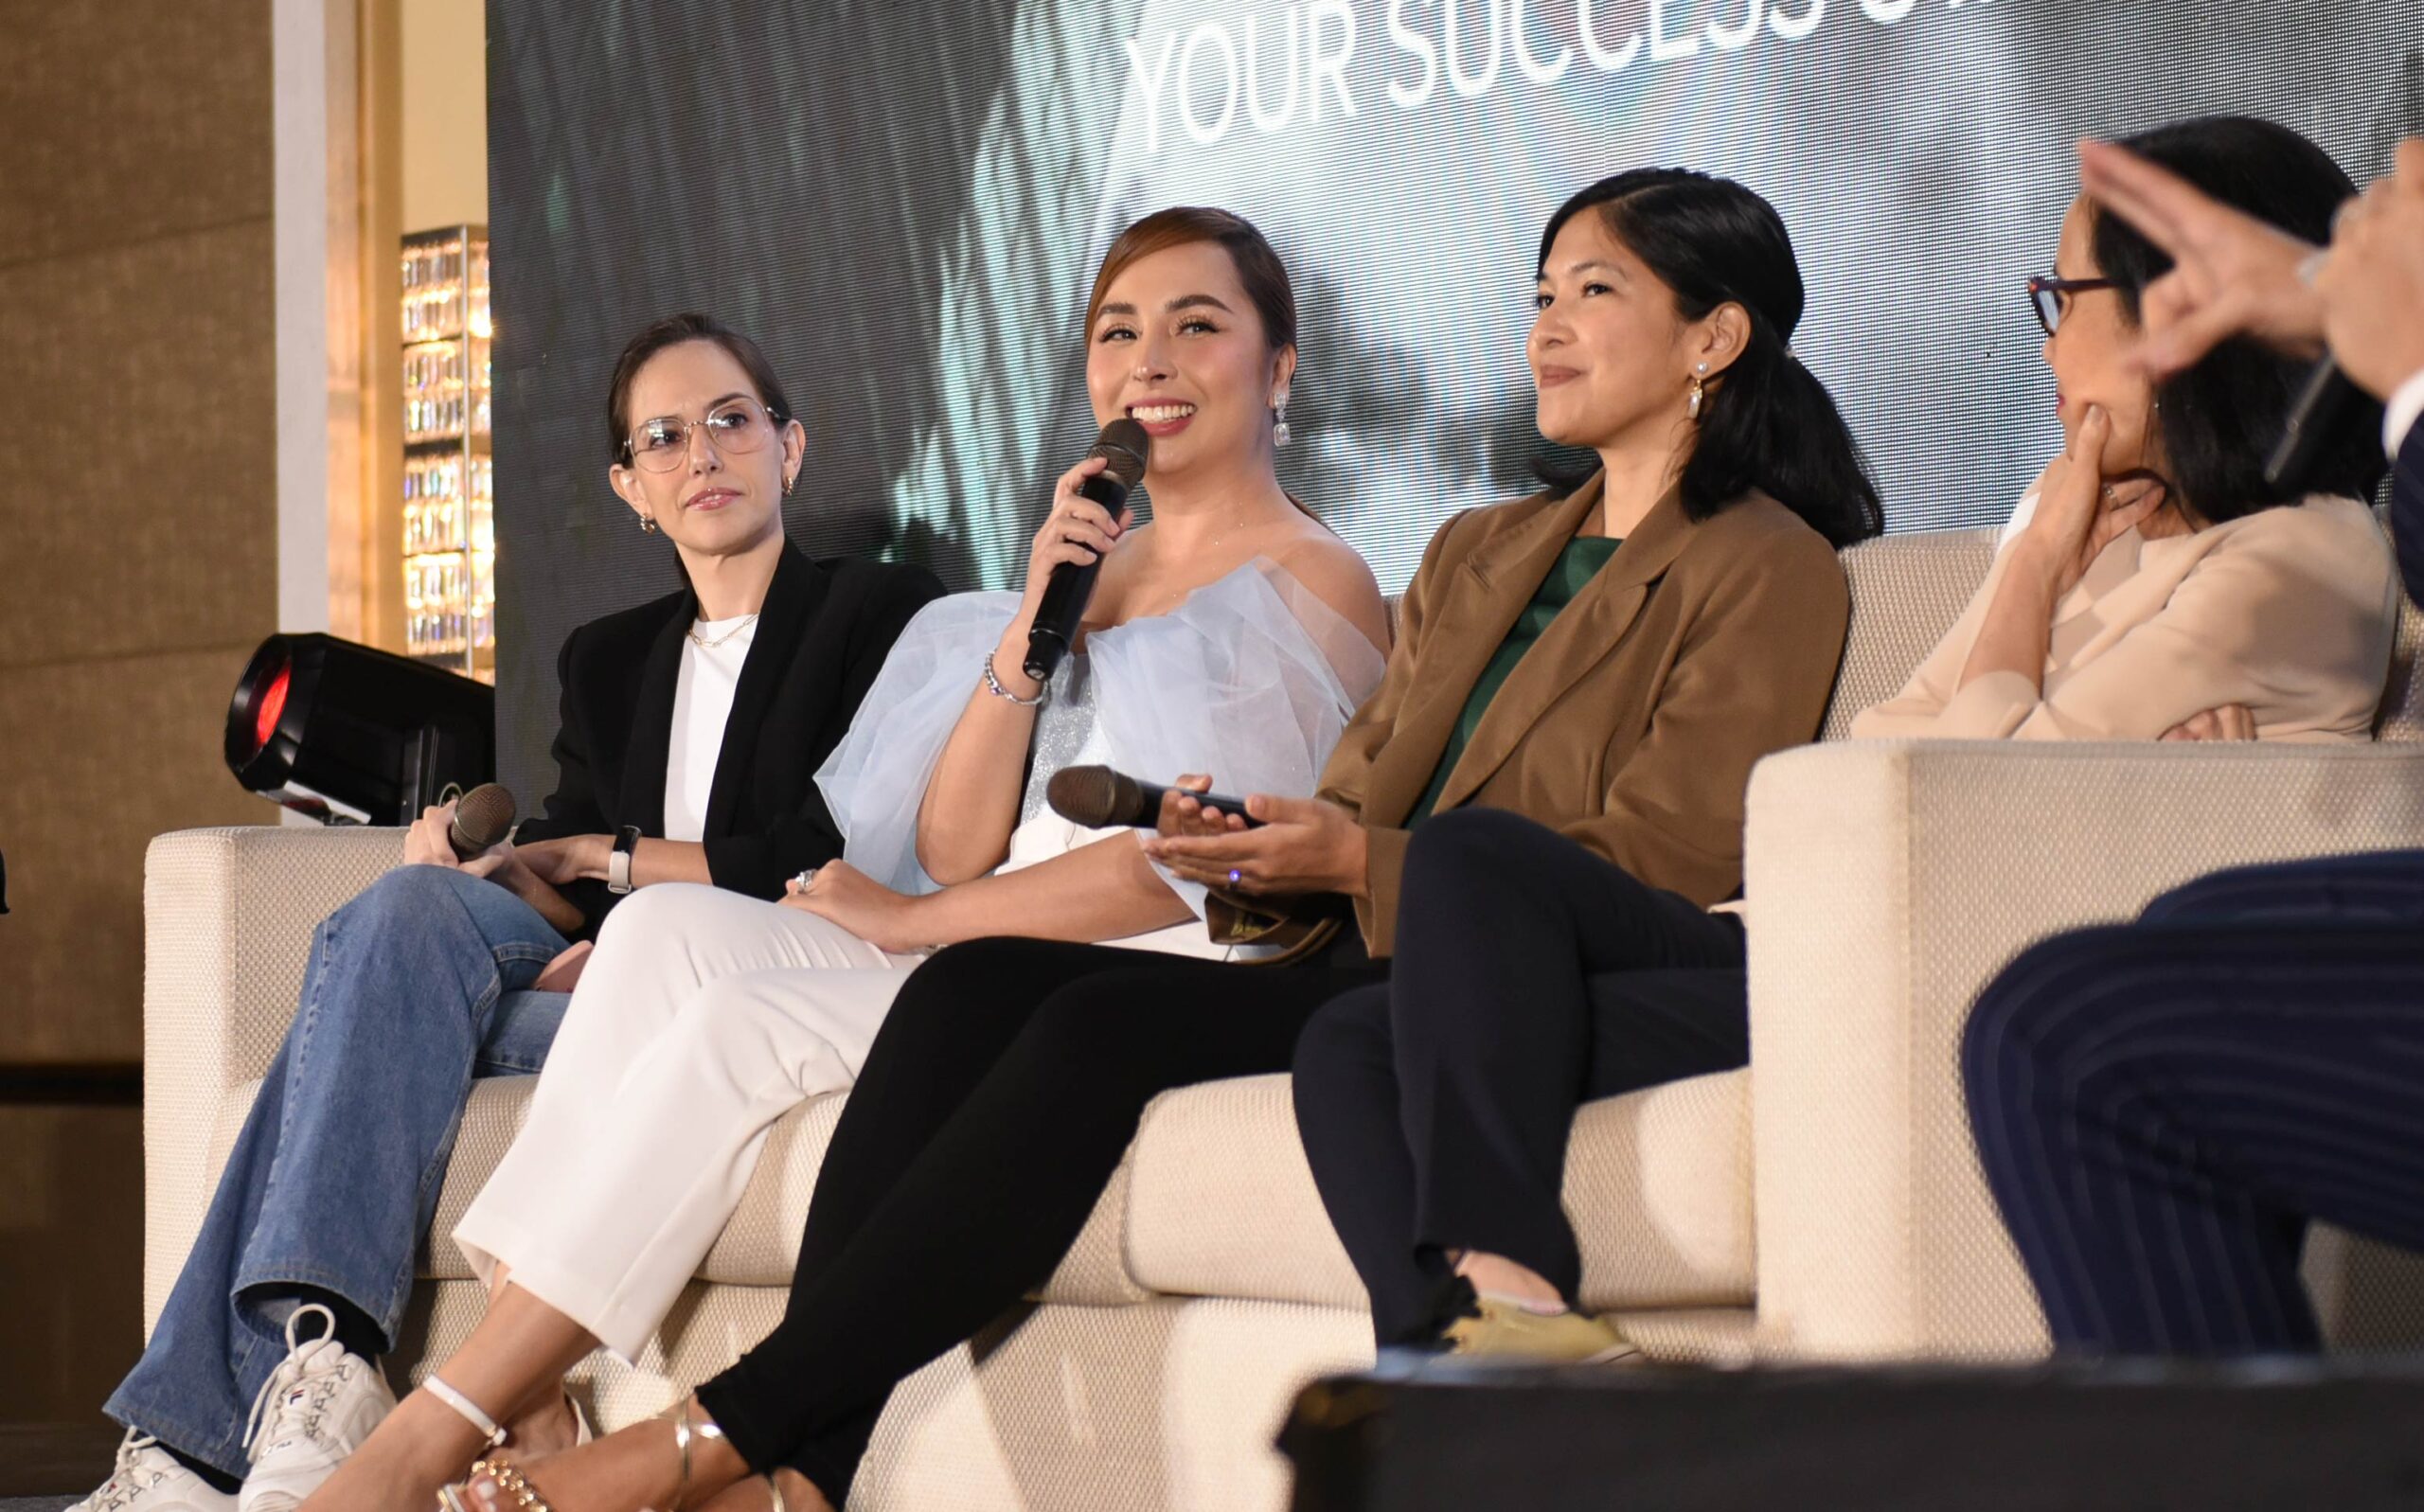 Sison-Ramos discusses the power of influencer marketing in the roundtable. Photo courtesy of Kieran Punay of KLIQ, Inc.